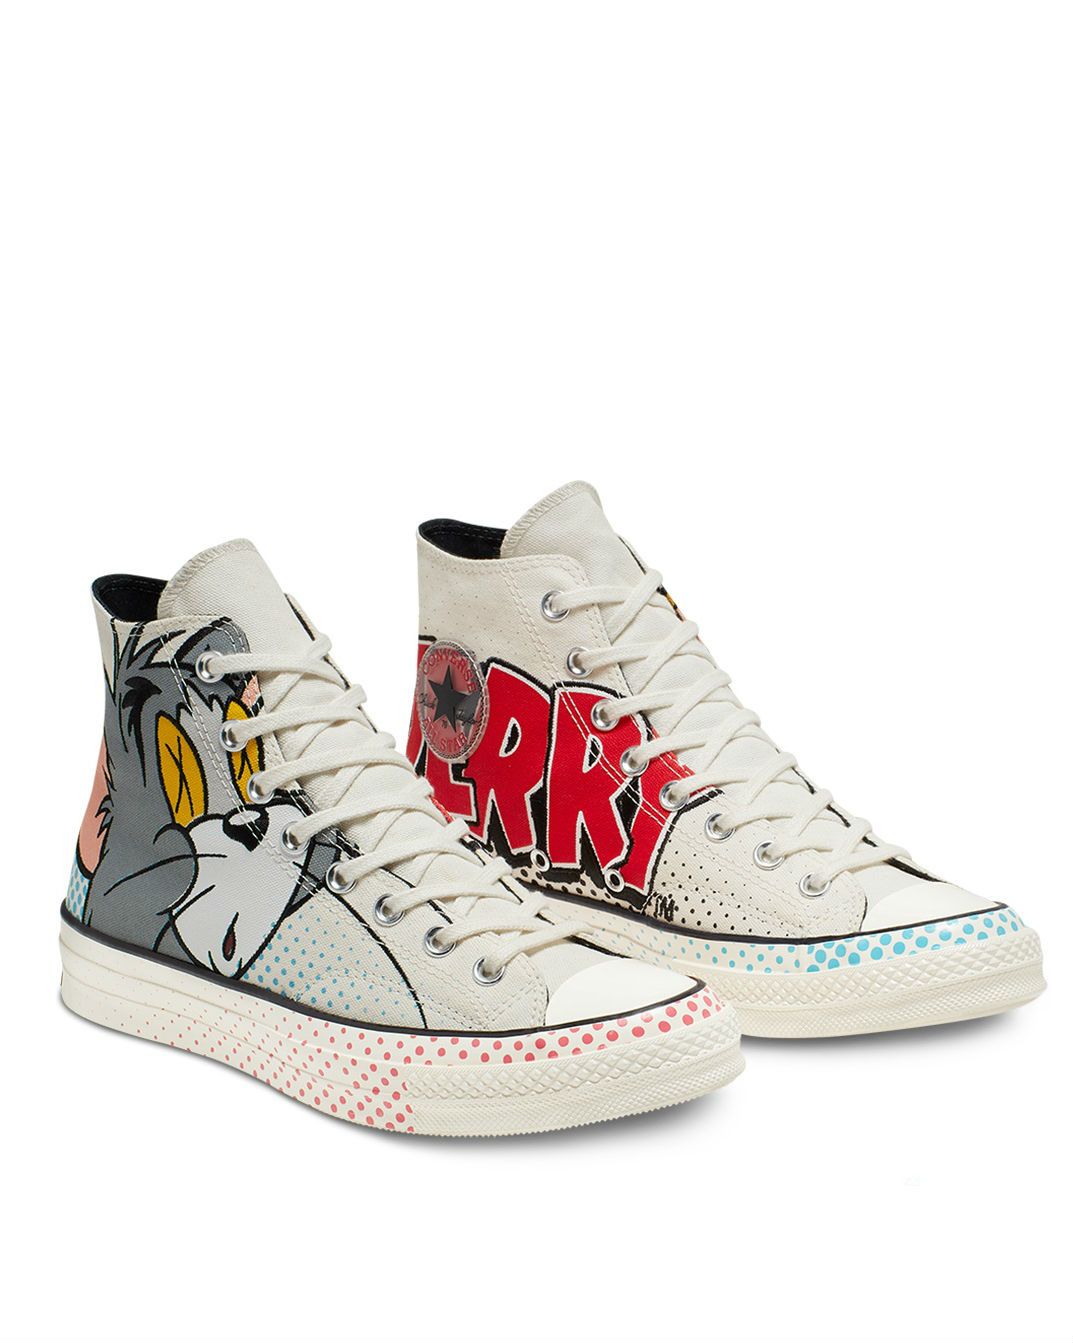 converse chuck taylor tom and jerry